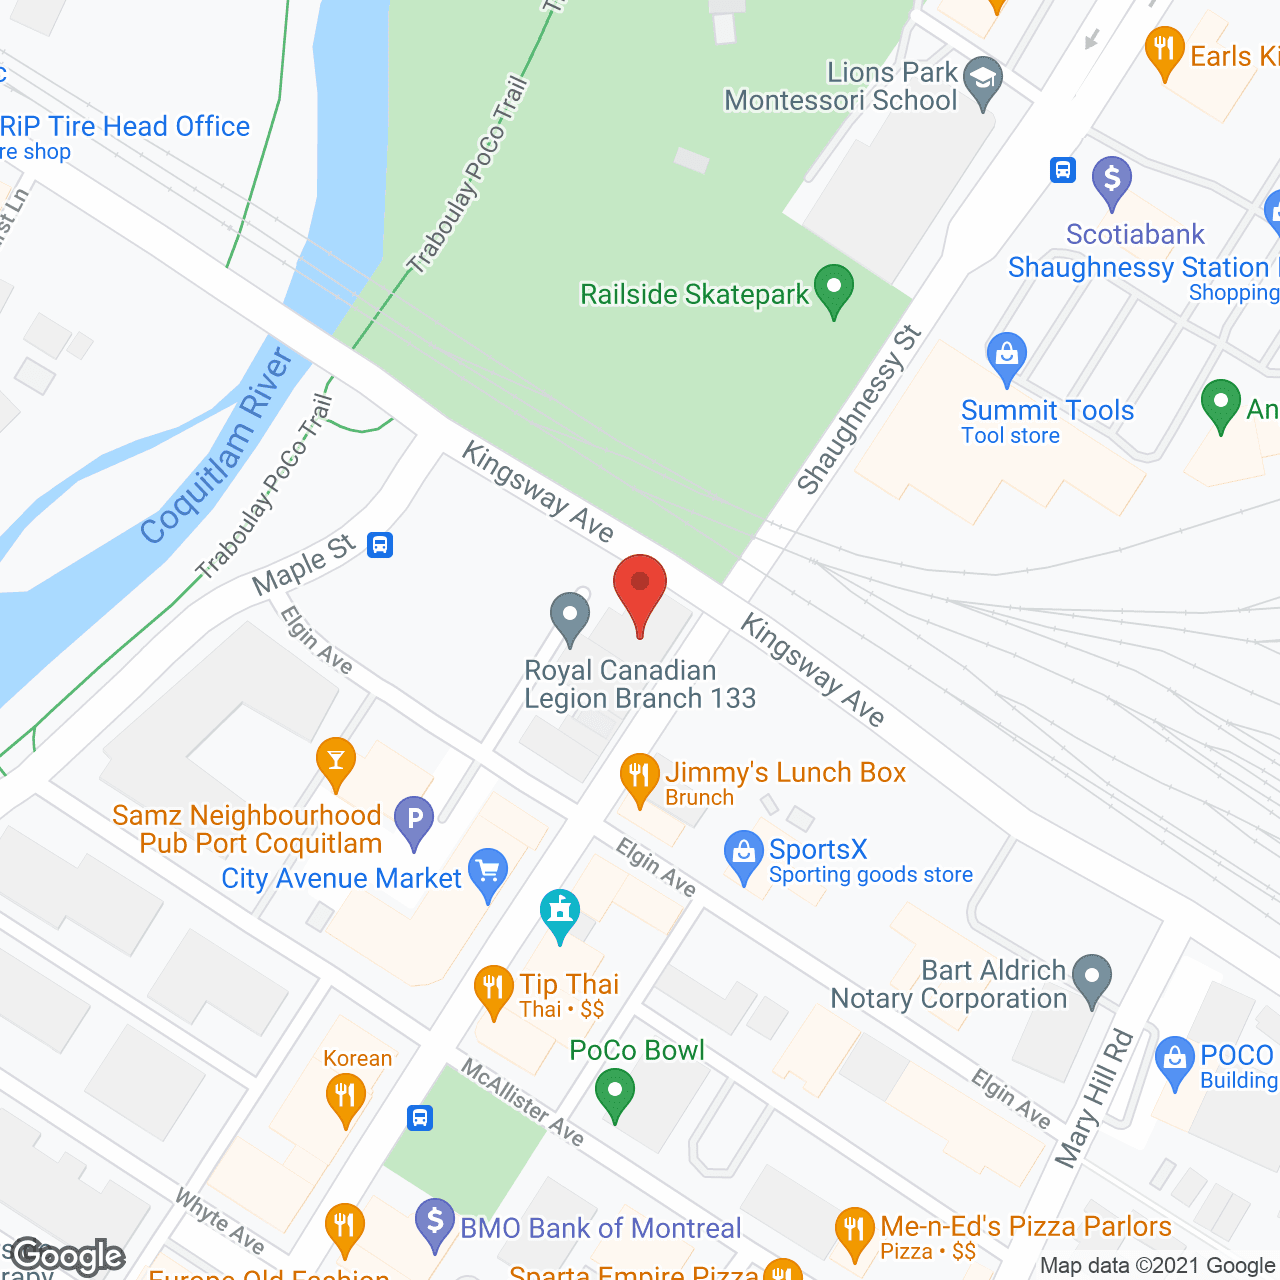 R.J. Kent: The Residences in google map